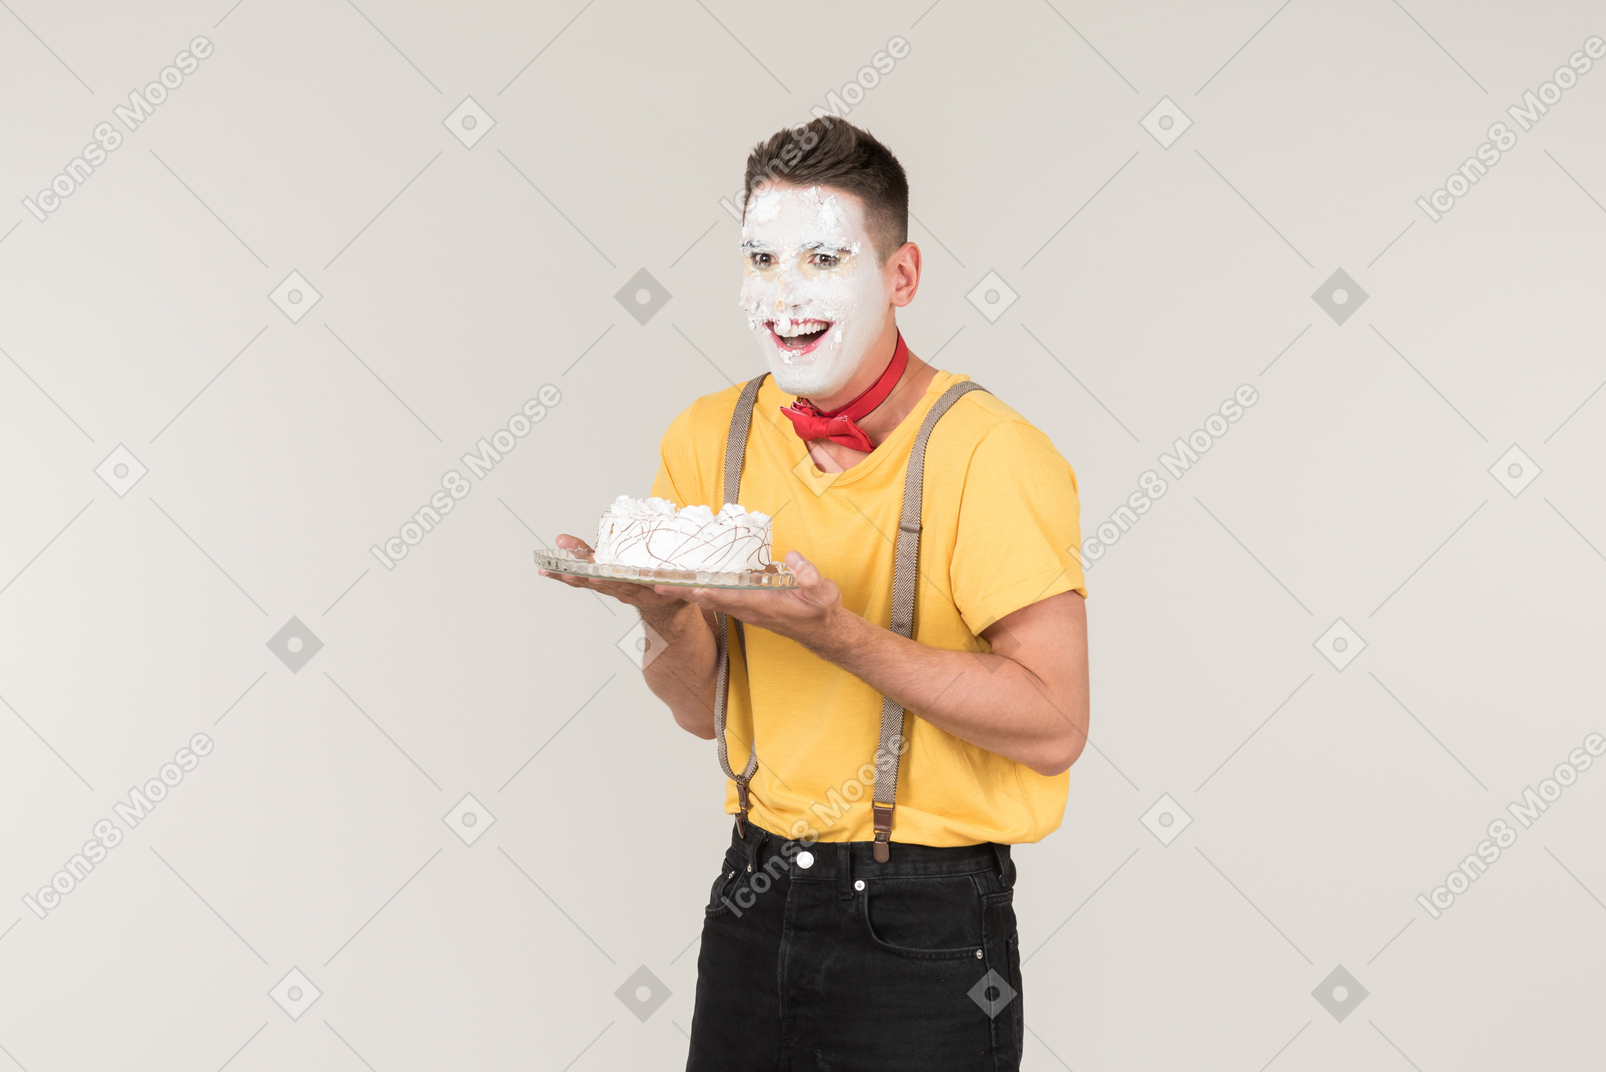 Male clown with cake cream on his face holding a cake